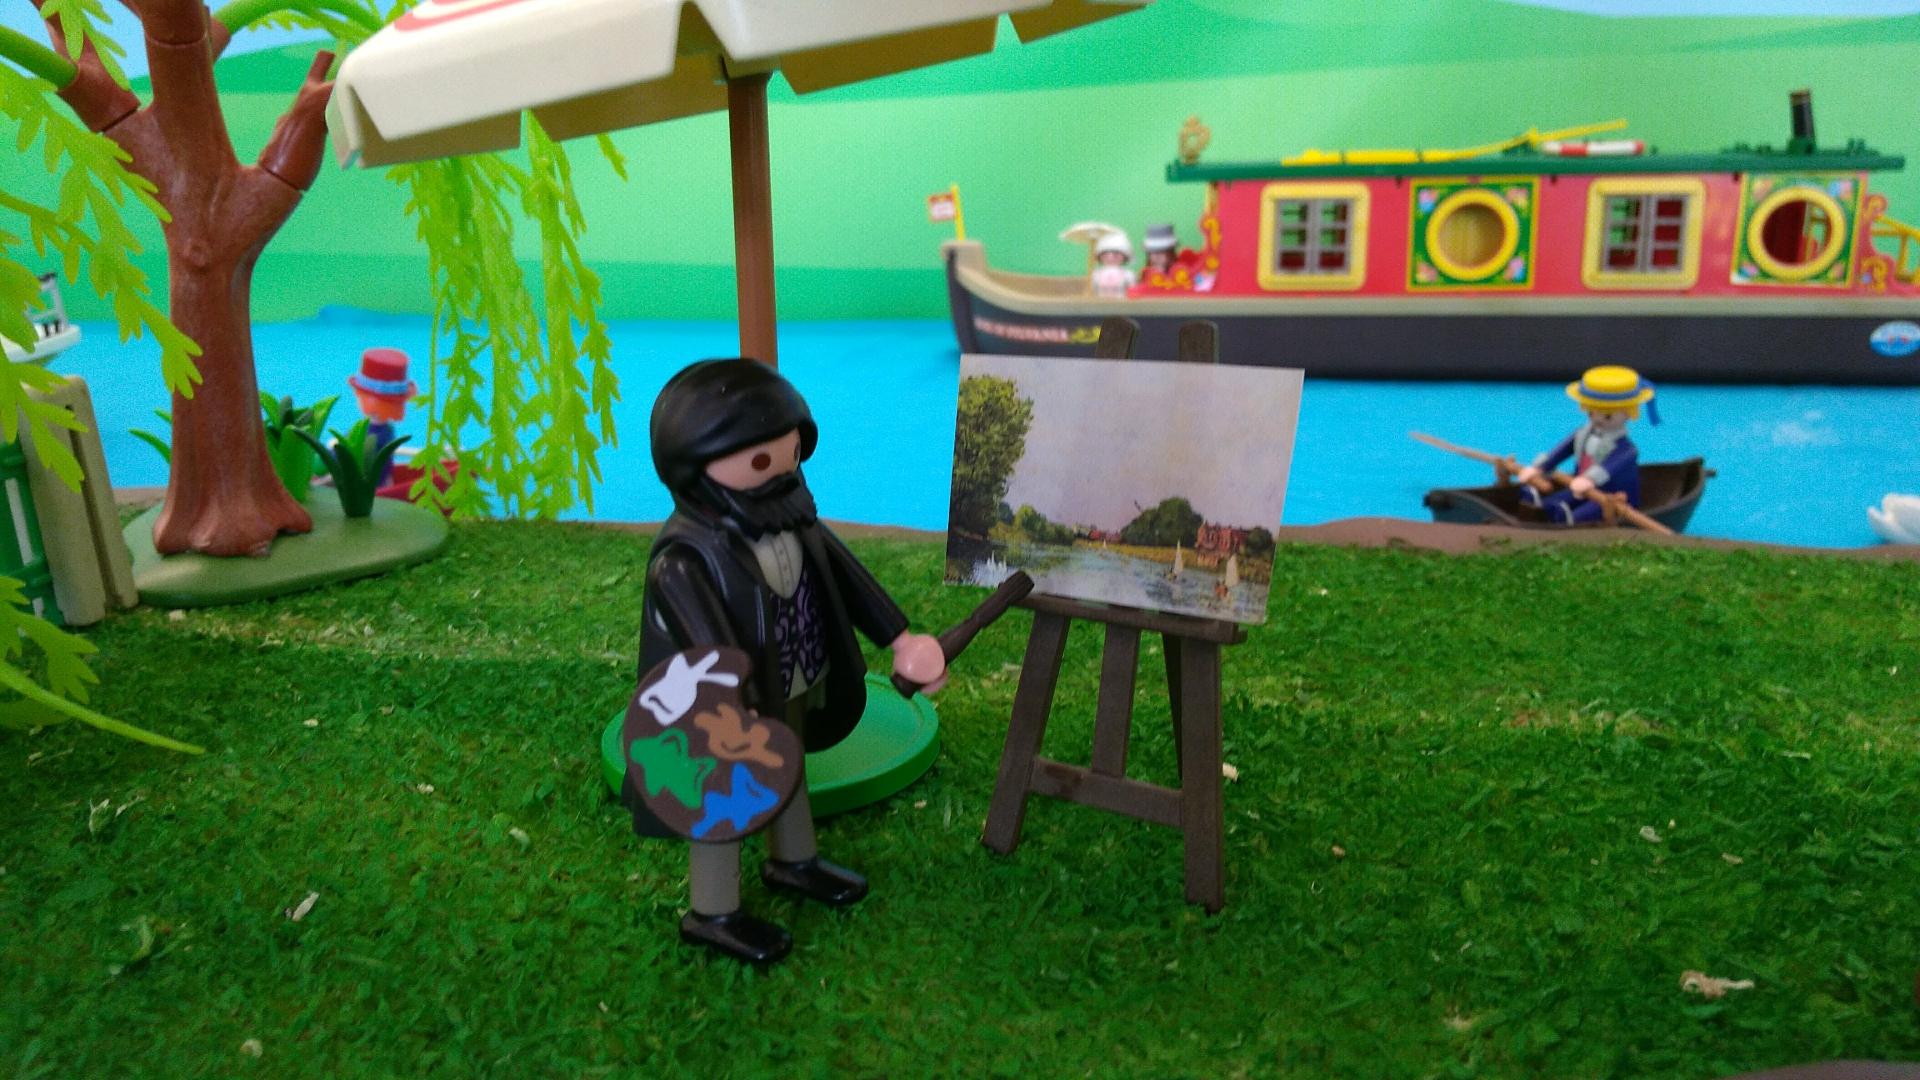 Playmobil alfred sisley dominique bethune exposition bougival